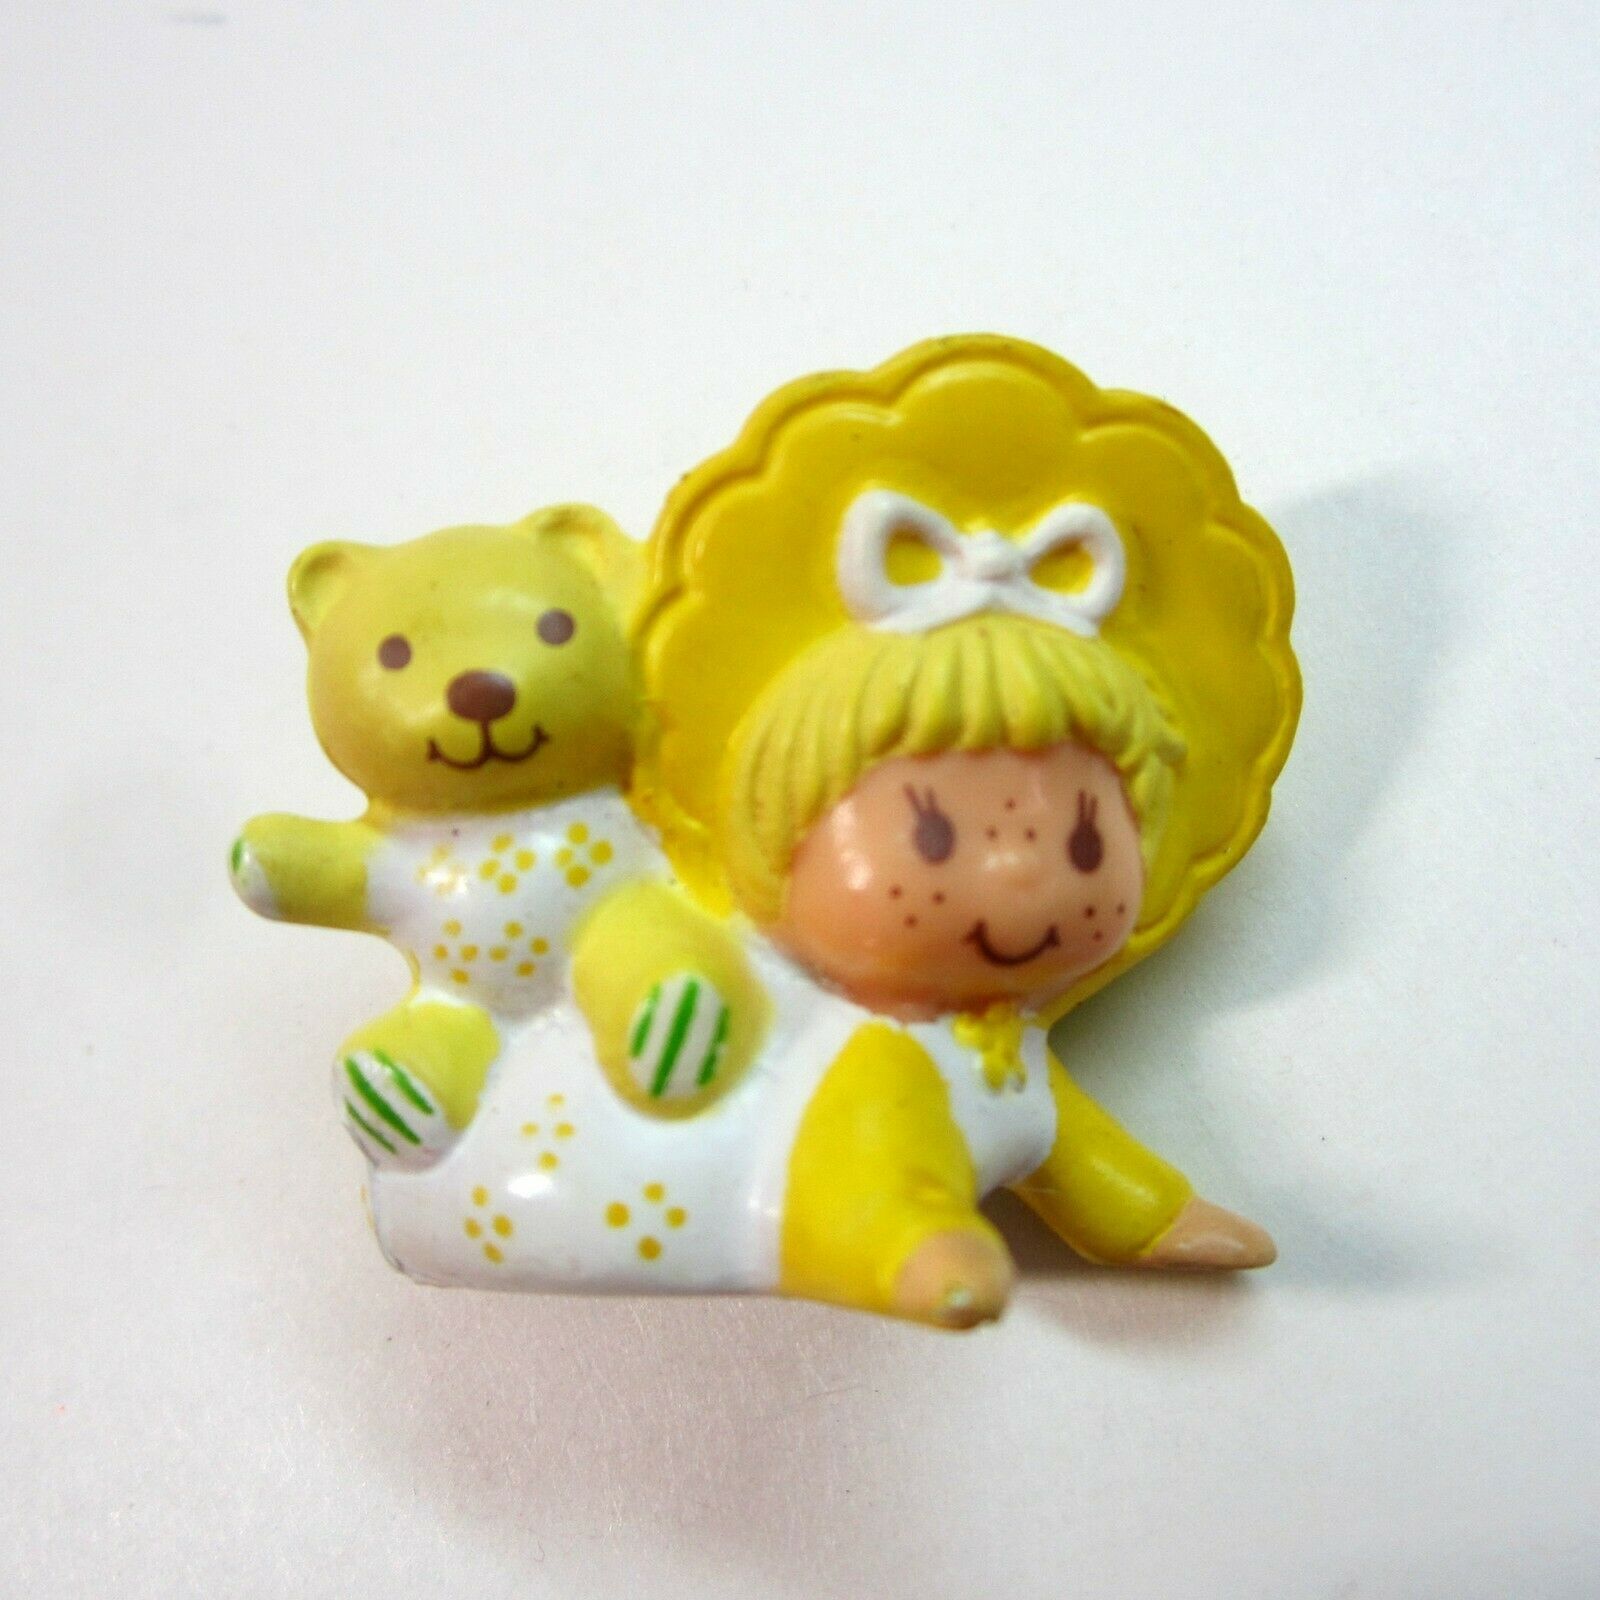 Primary image for Vintage Strawberry Shortcake Butter Cookie with Jelly Bear Miniature PVC Figure